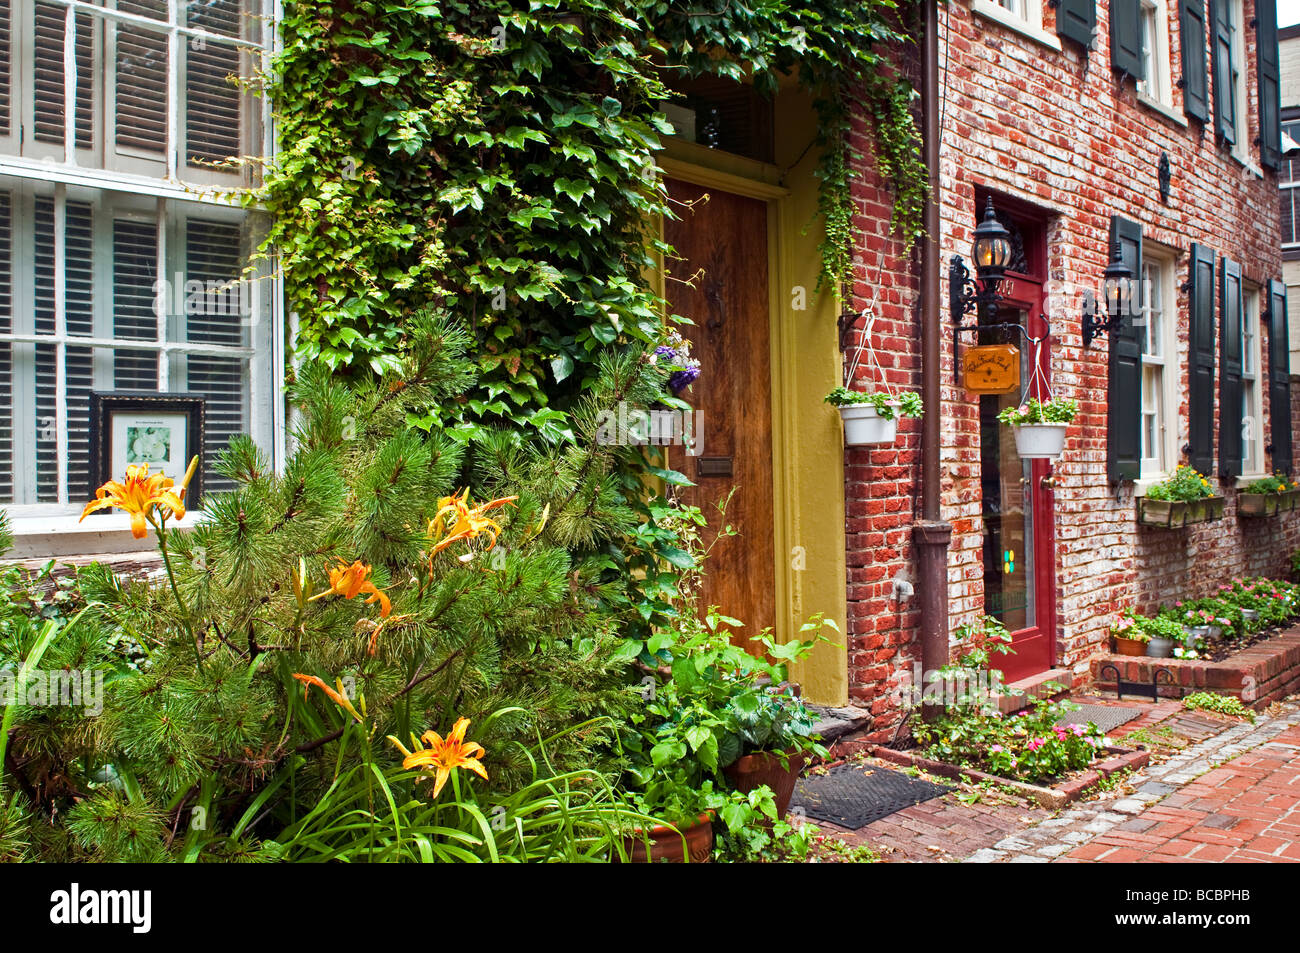 Offices, houses and shops on the side streets of Georgetown, Washington DC. Stock Photo